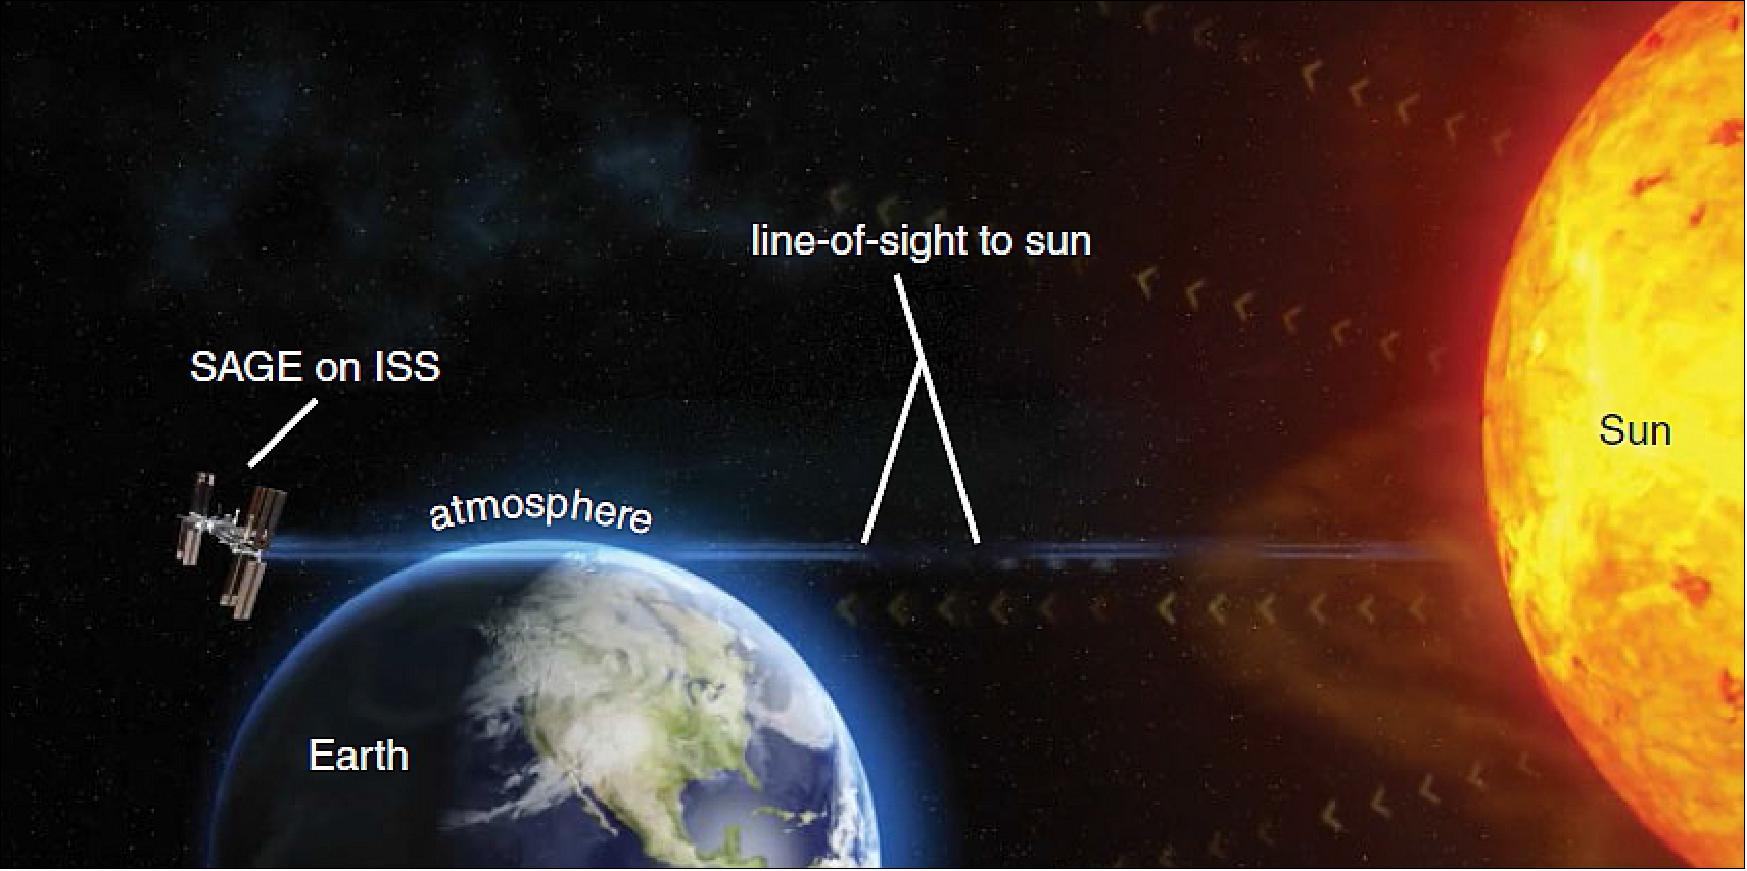 Figure 17: By using the sun and moon as light sources, SAGE can detect O3, aerosols and other trace gases in the atmosphere (image credit: NASA)